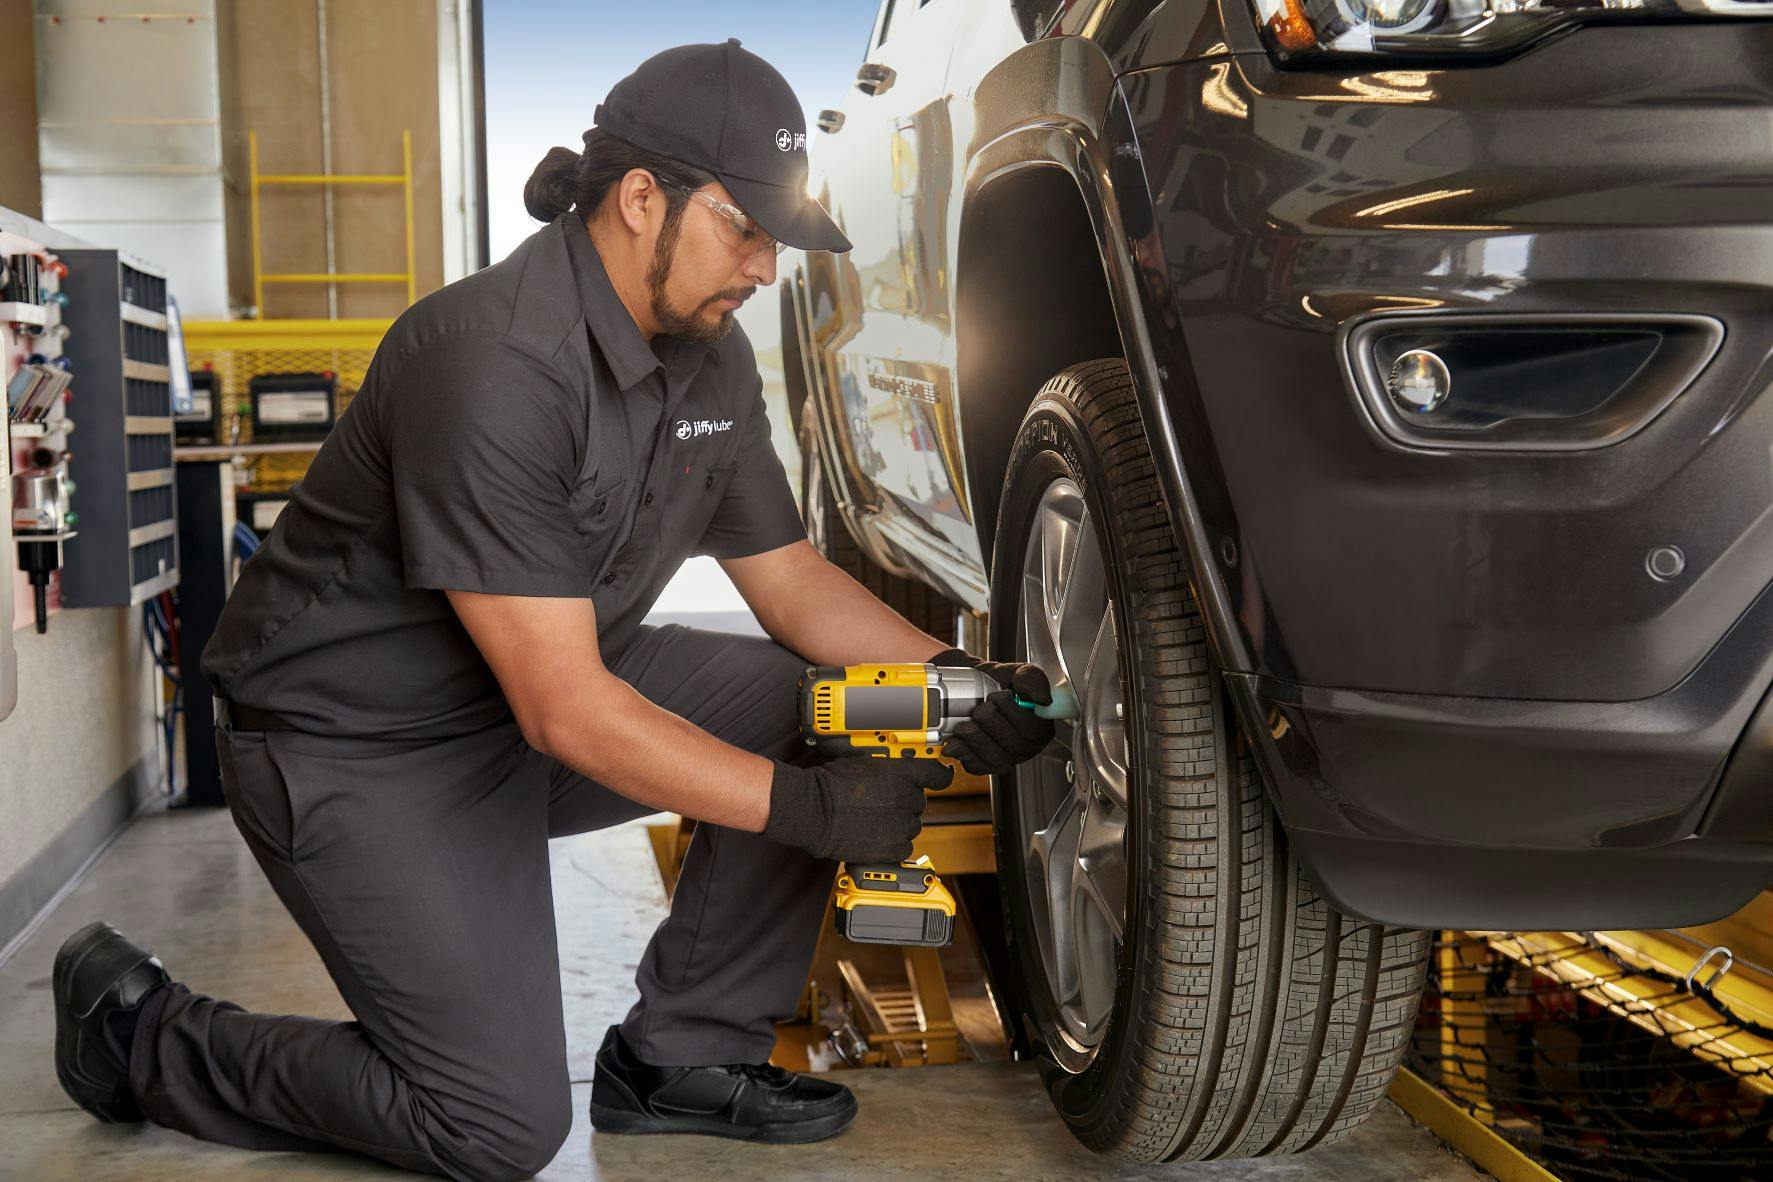 Jiffy Lube technician tightening lug nuts after rotating the tires on a vehicle